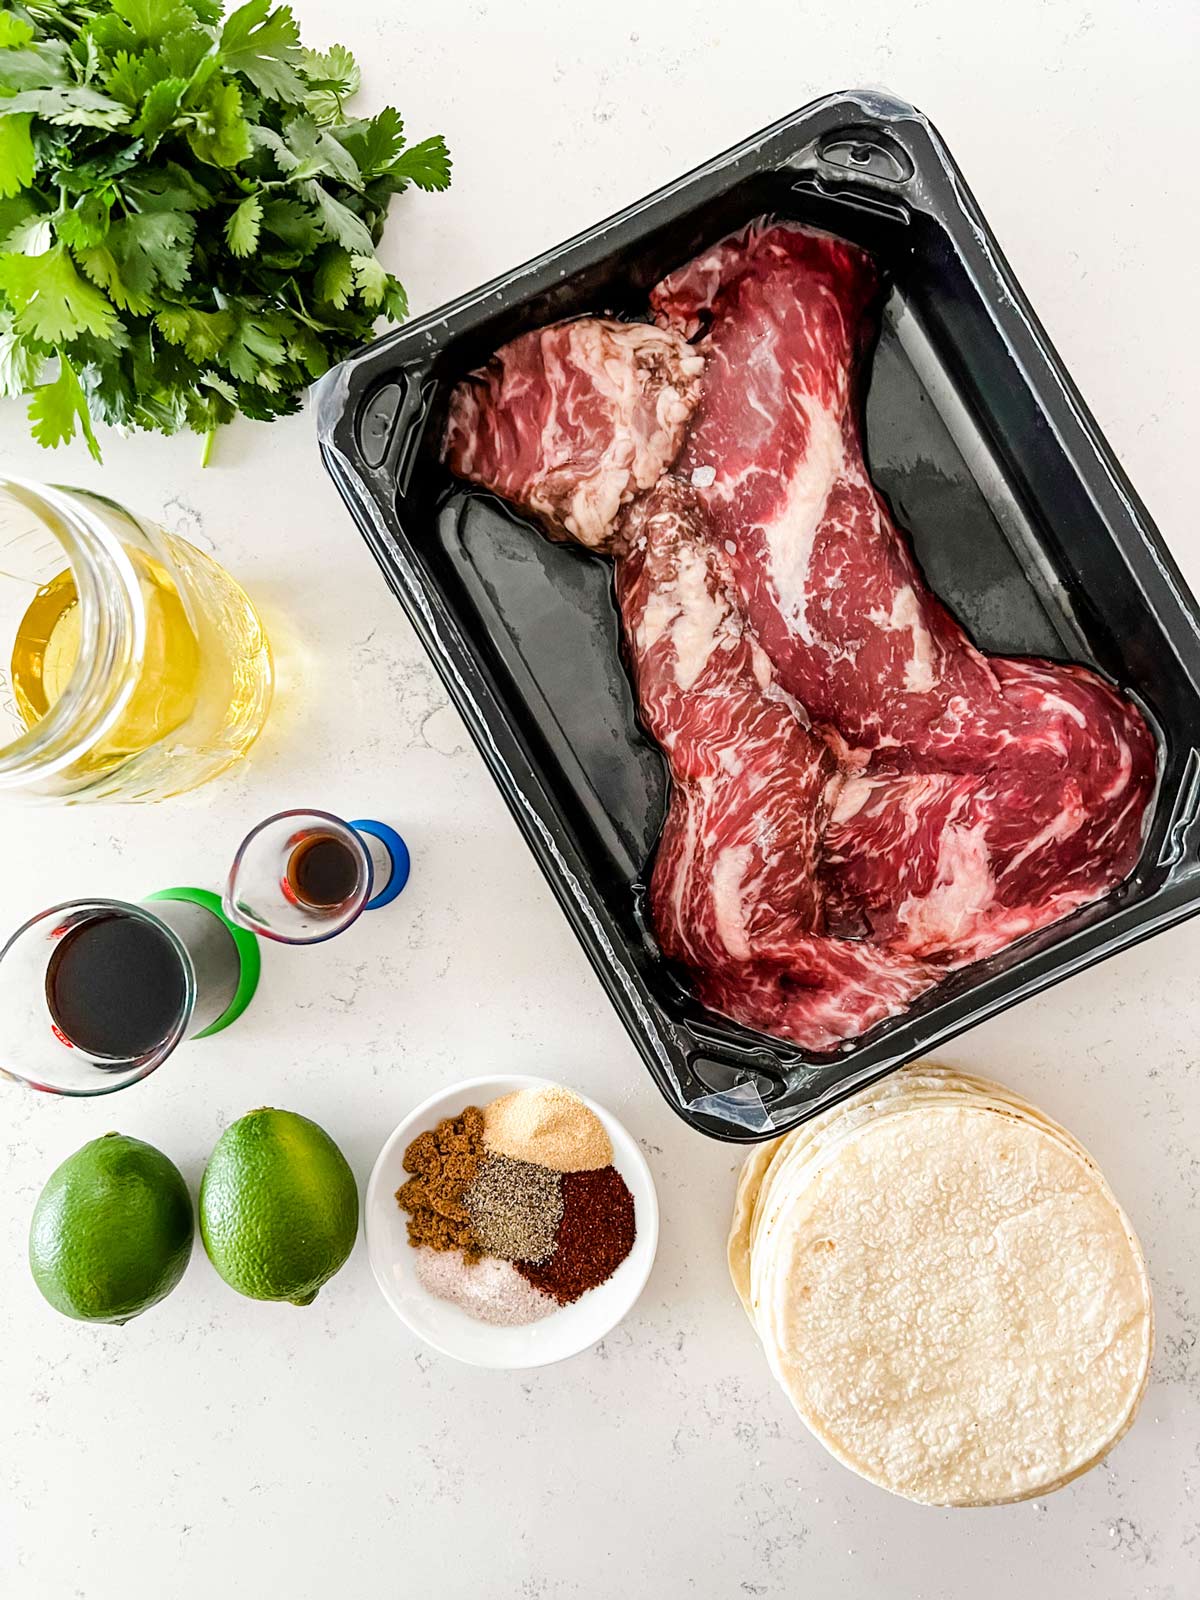 Overhead photo of hanger steak, tortillas, cilantro, oil, limes, seasonings, soy sauce and Worcestershire in prep containers.